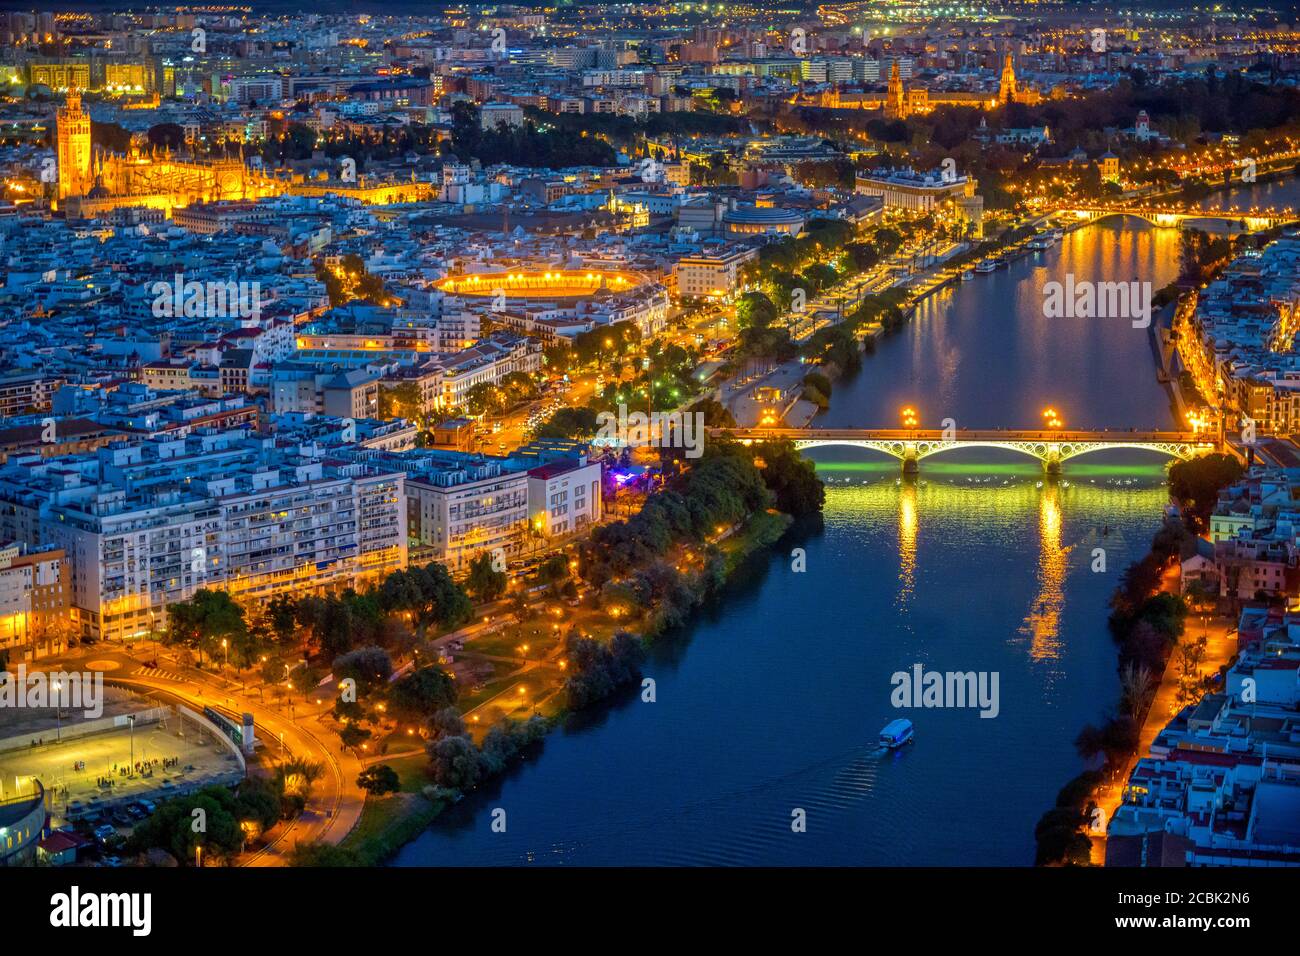 Aerial view of downtown Seville at night, showing some of the main landmarks: Triana bridge, Guadalquivir river, Cathedral, Giralda tower, Maestranza Stock Photo